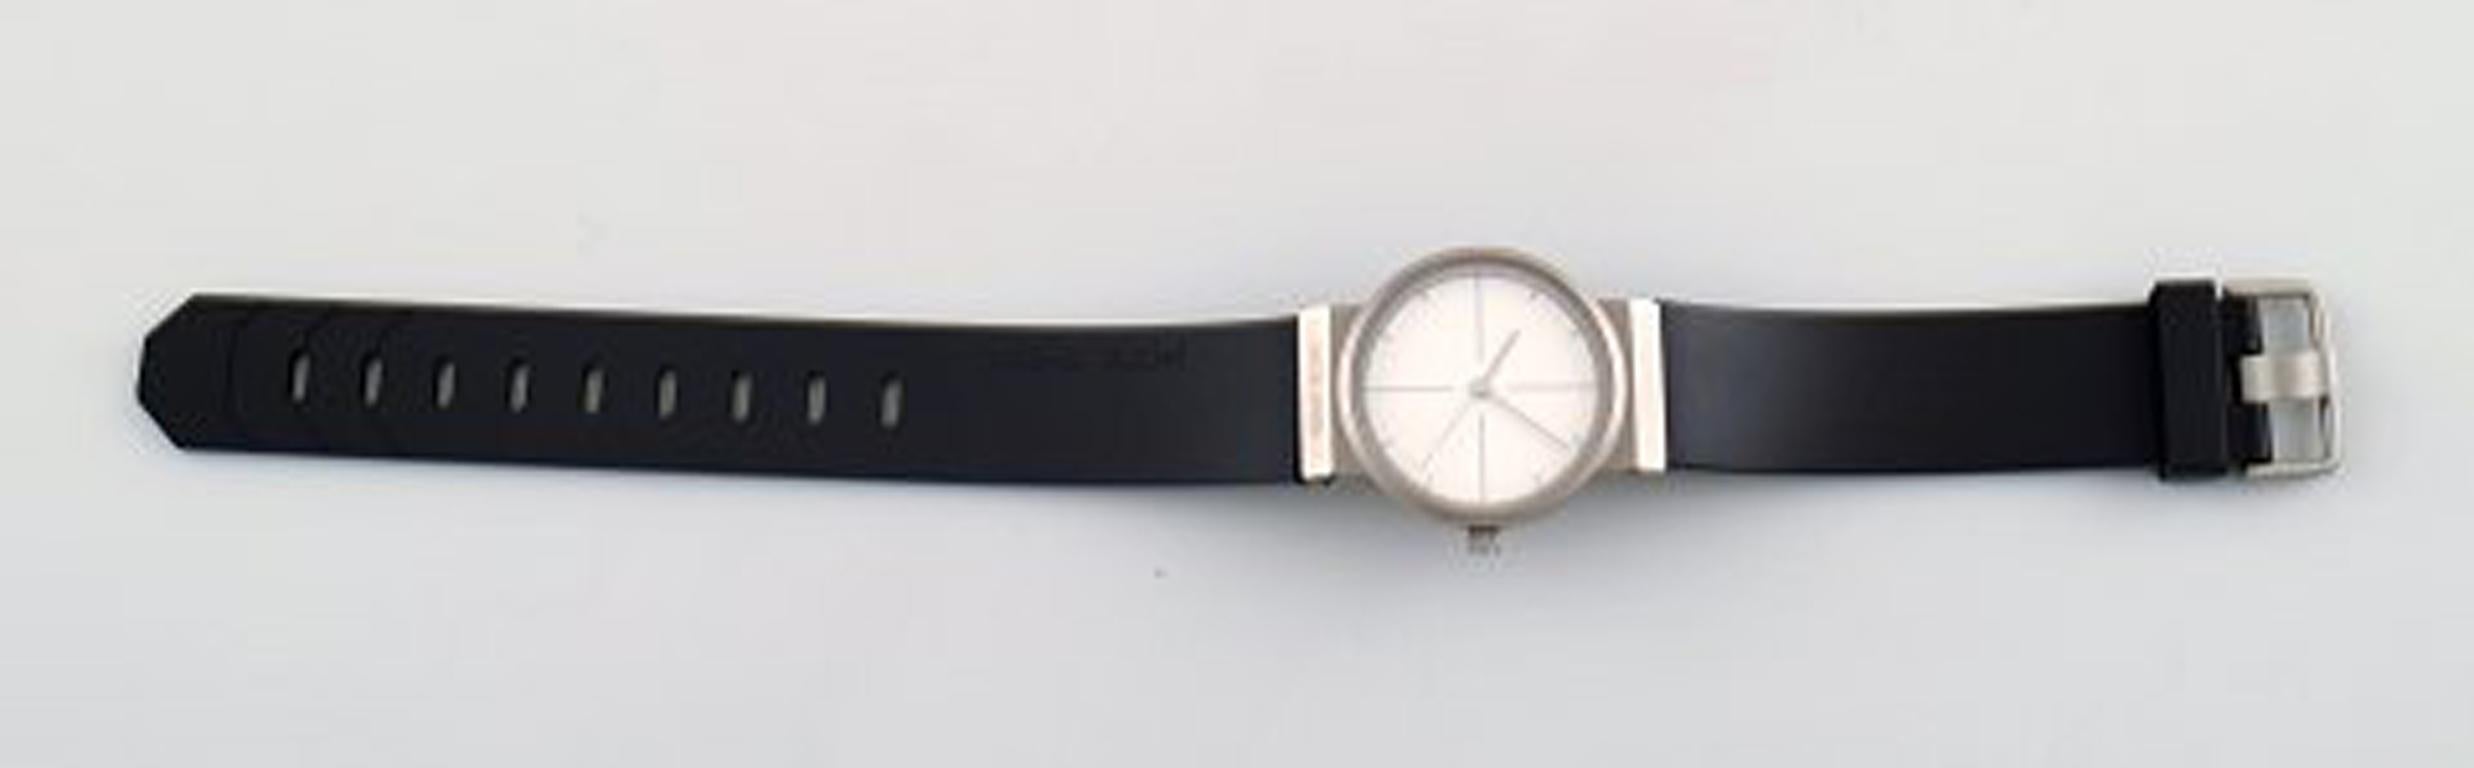 Jacob Jensen lady watch. Titanium case.
Ø 28 mm.
Fitted with original black rubber strap. No. 10108.
In perfect condition